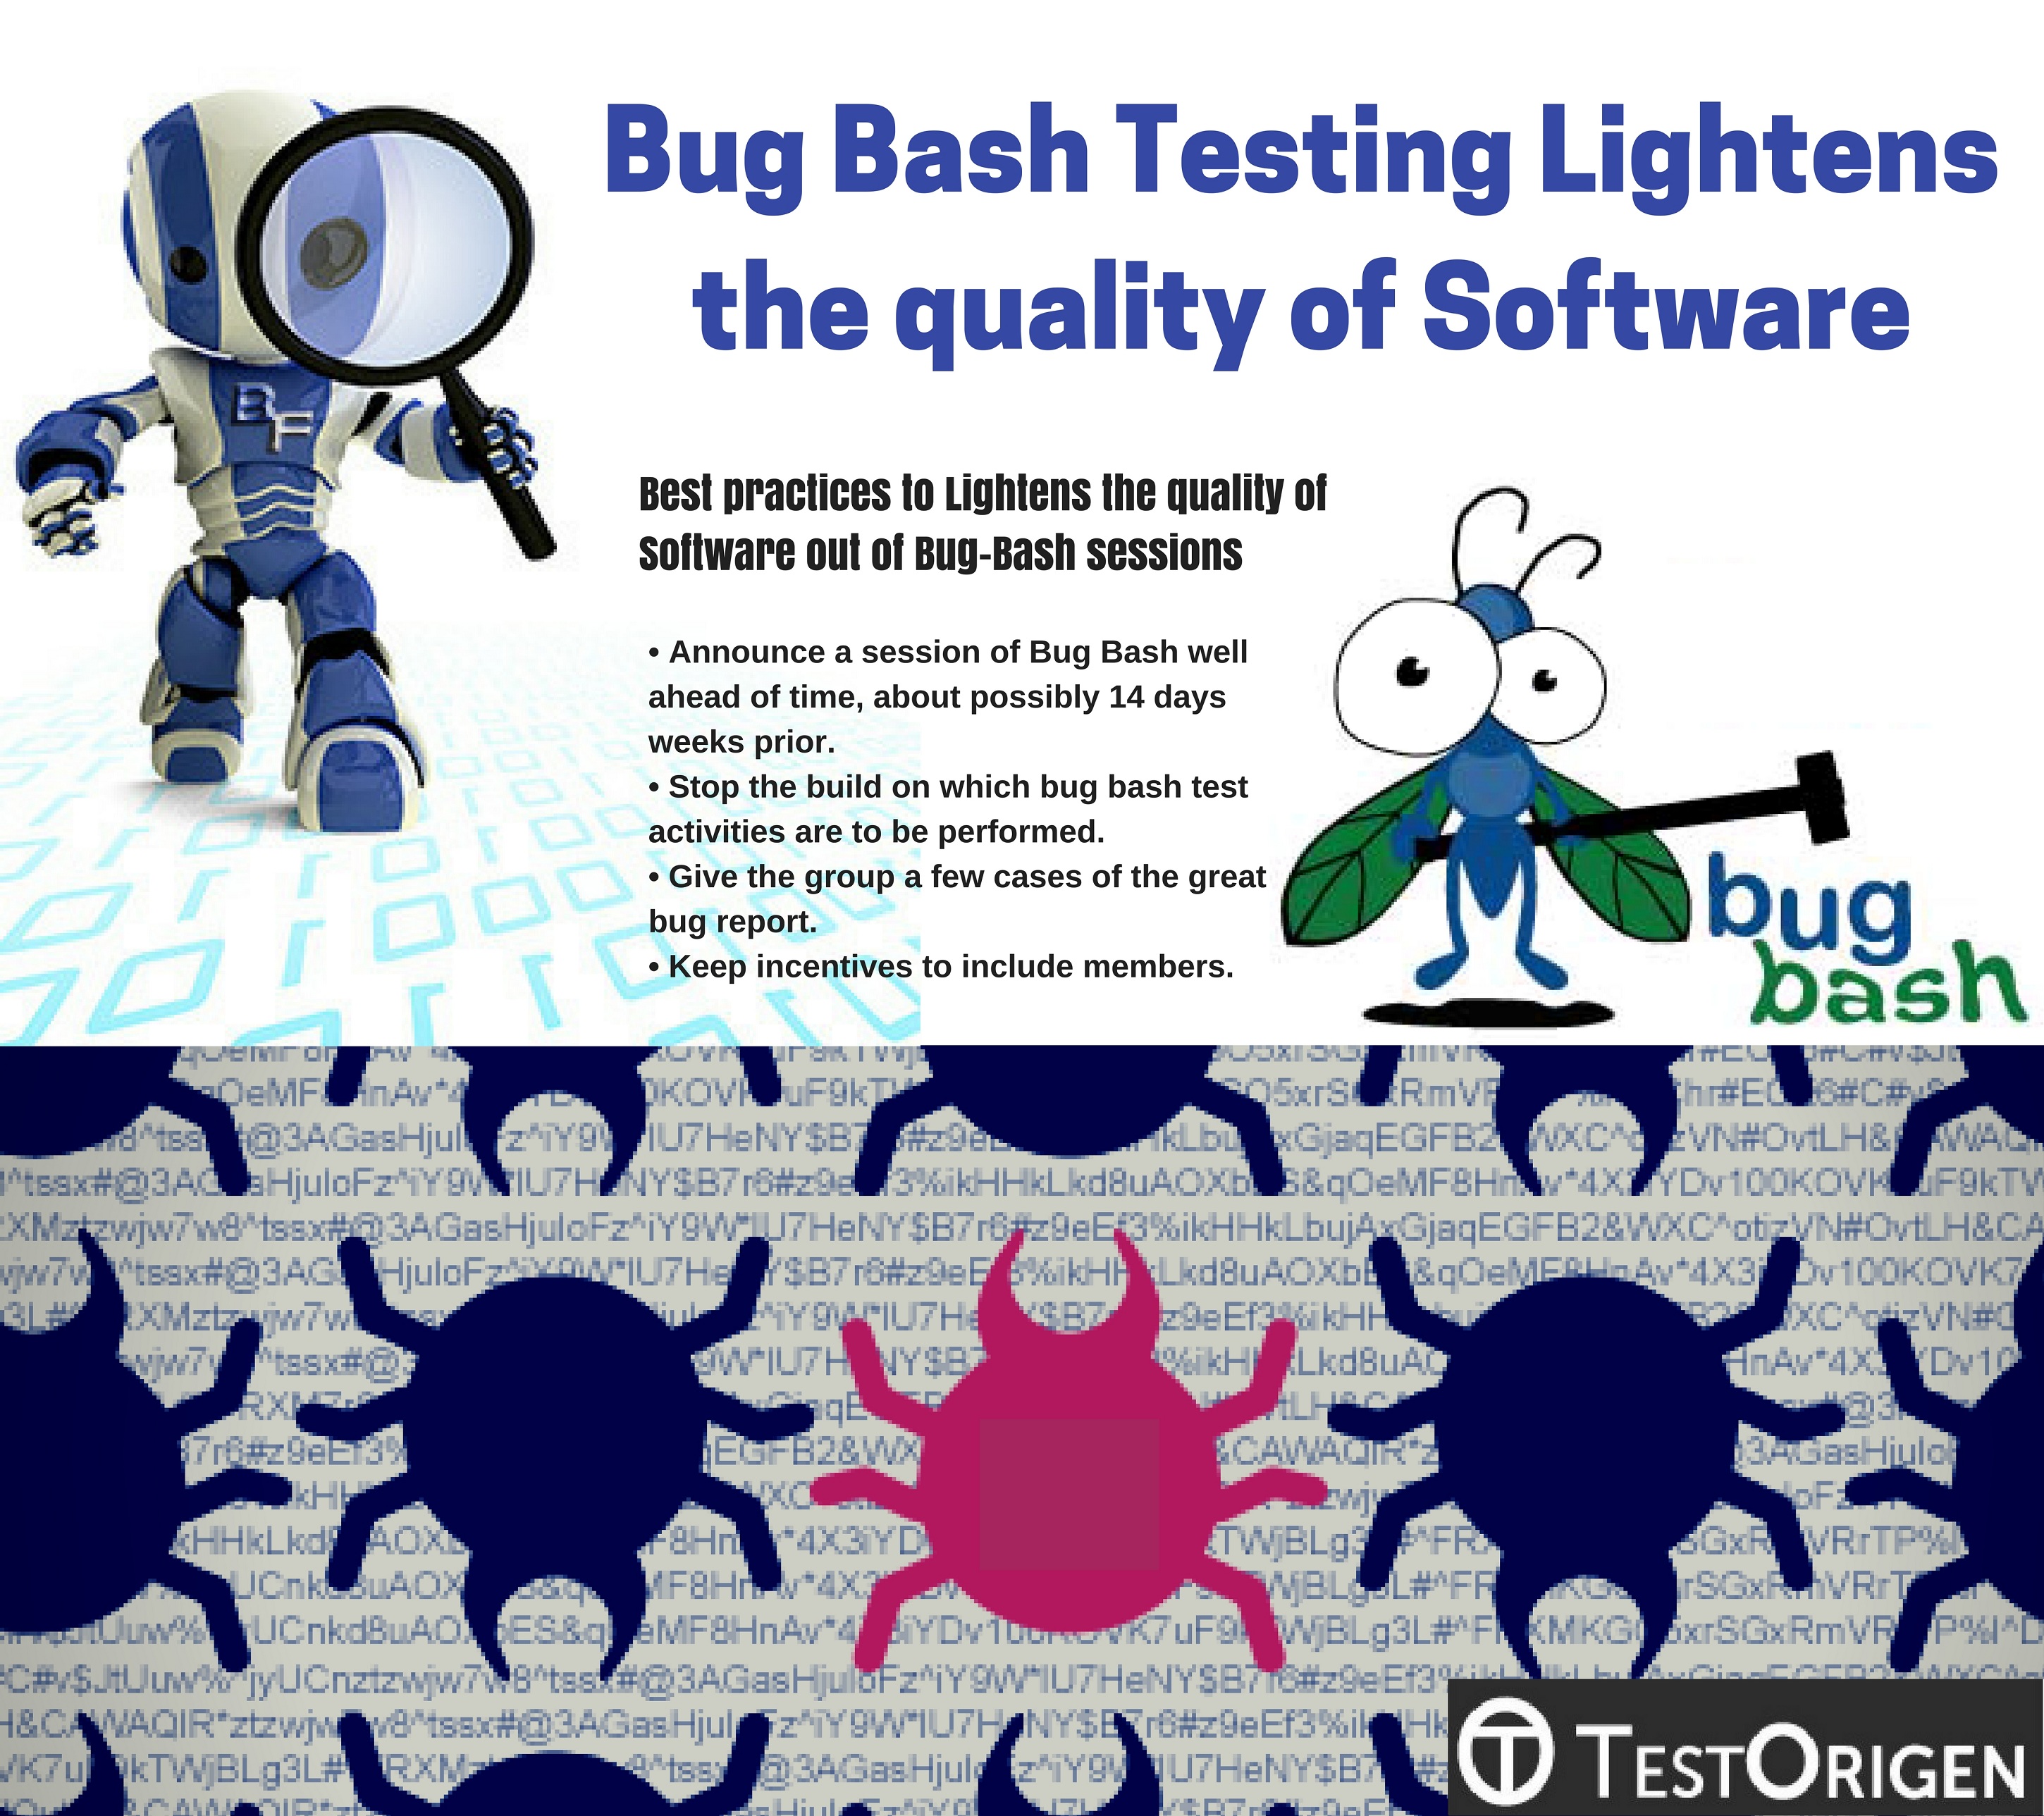 Bug Bash Testing Lightens the quality of Software